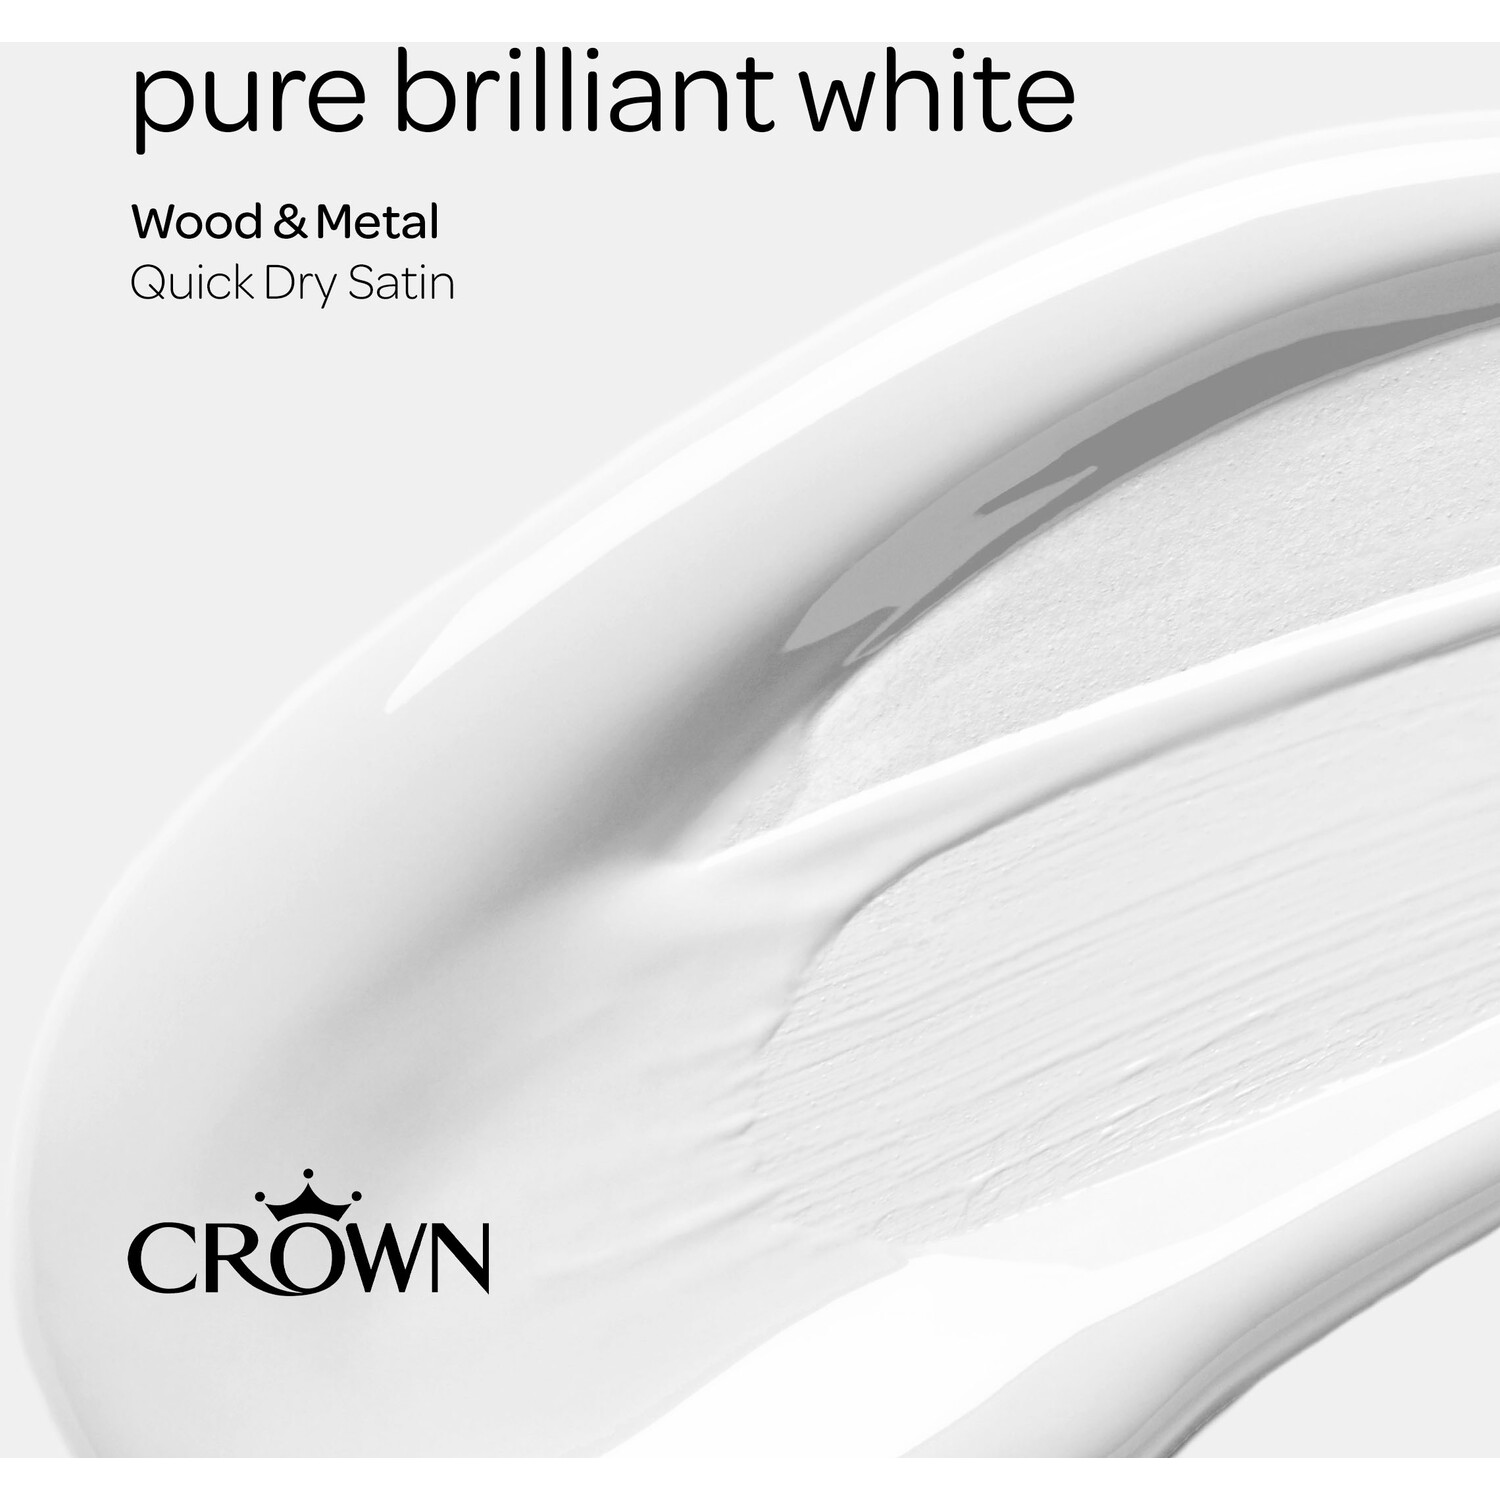 Crown Quick Dry Wood and Metal Pure Brilliant White Satin Paint 750ml Image 4